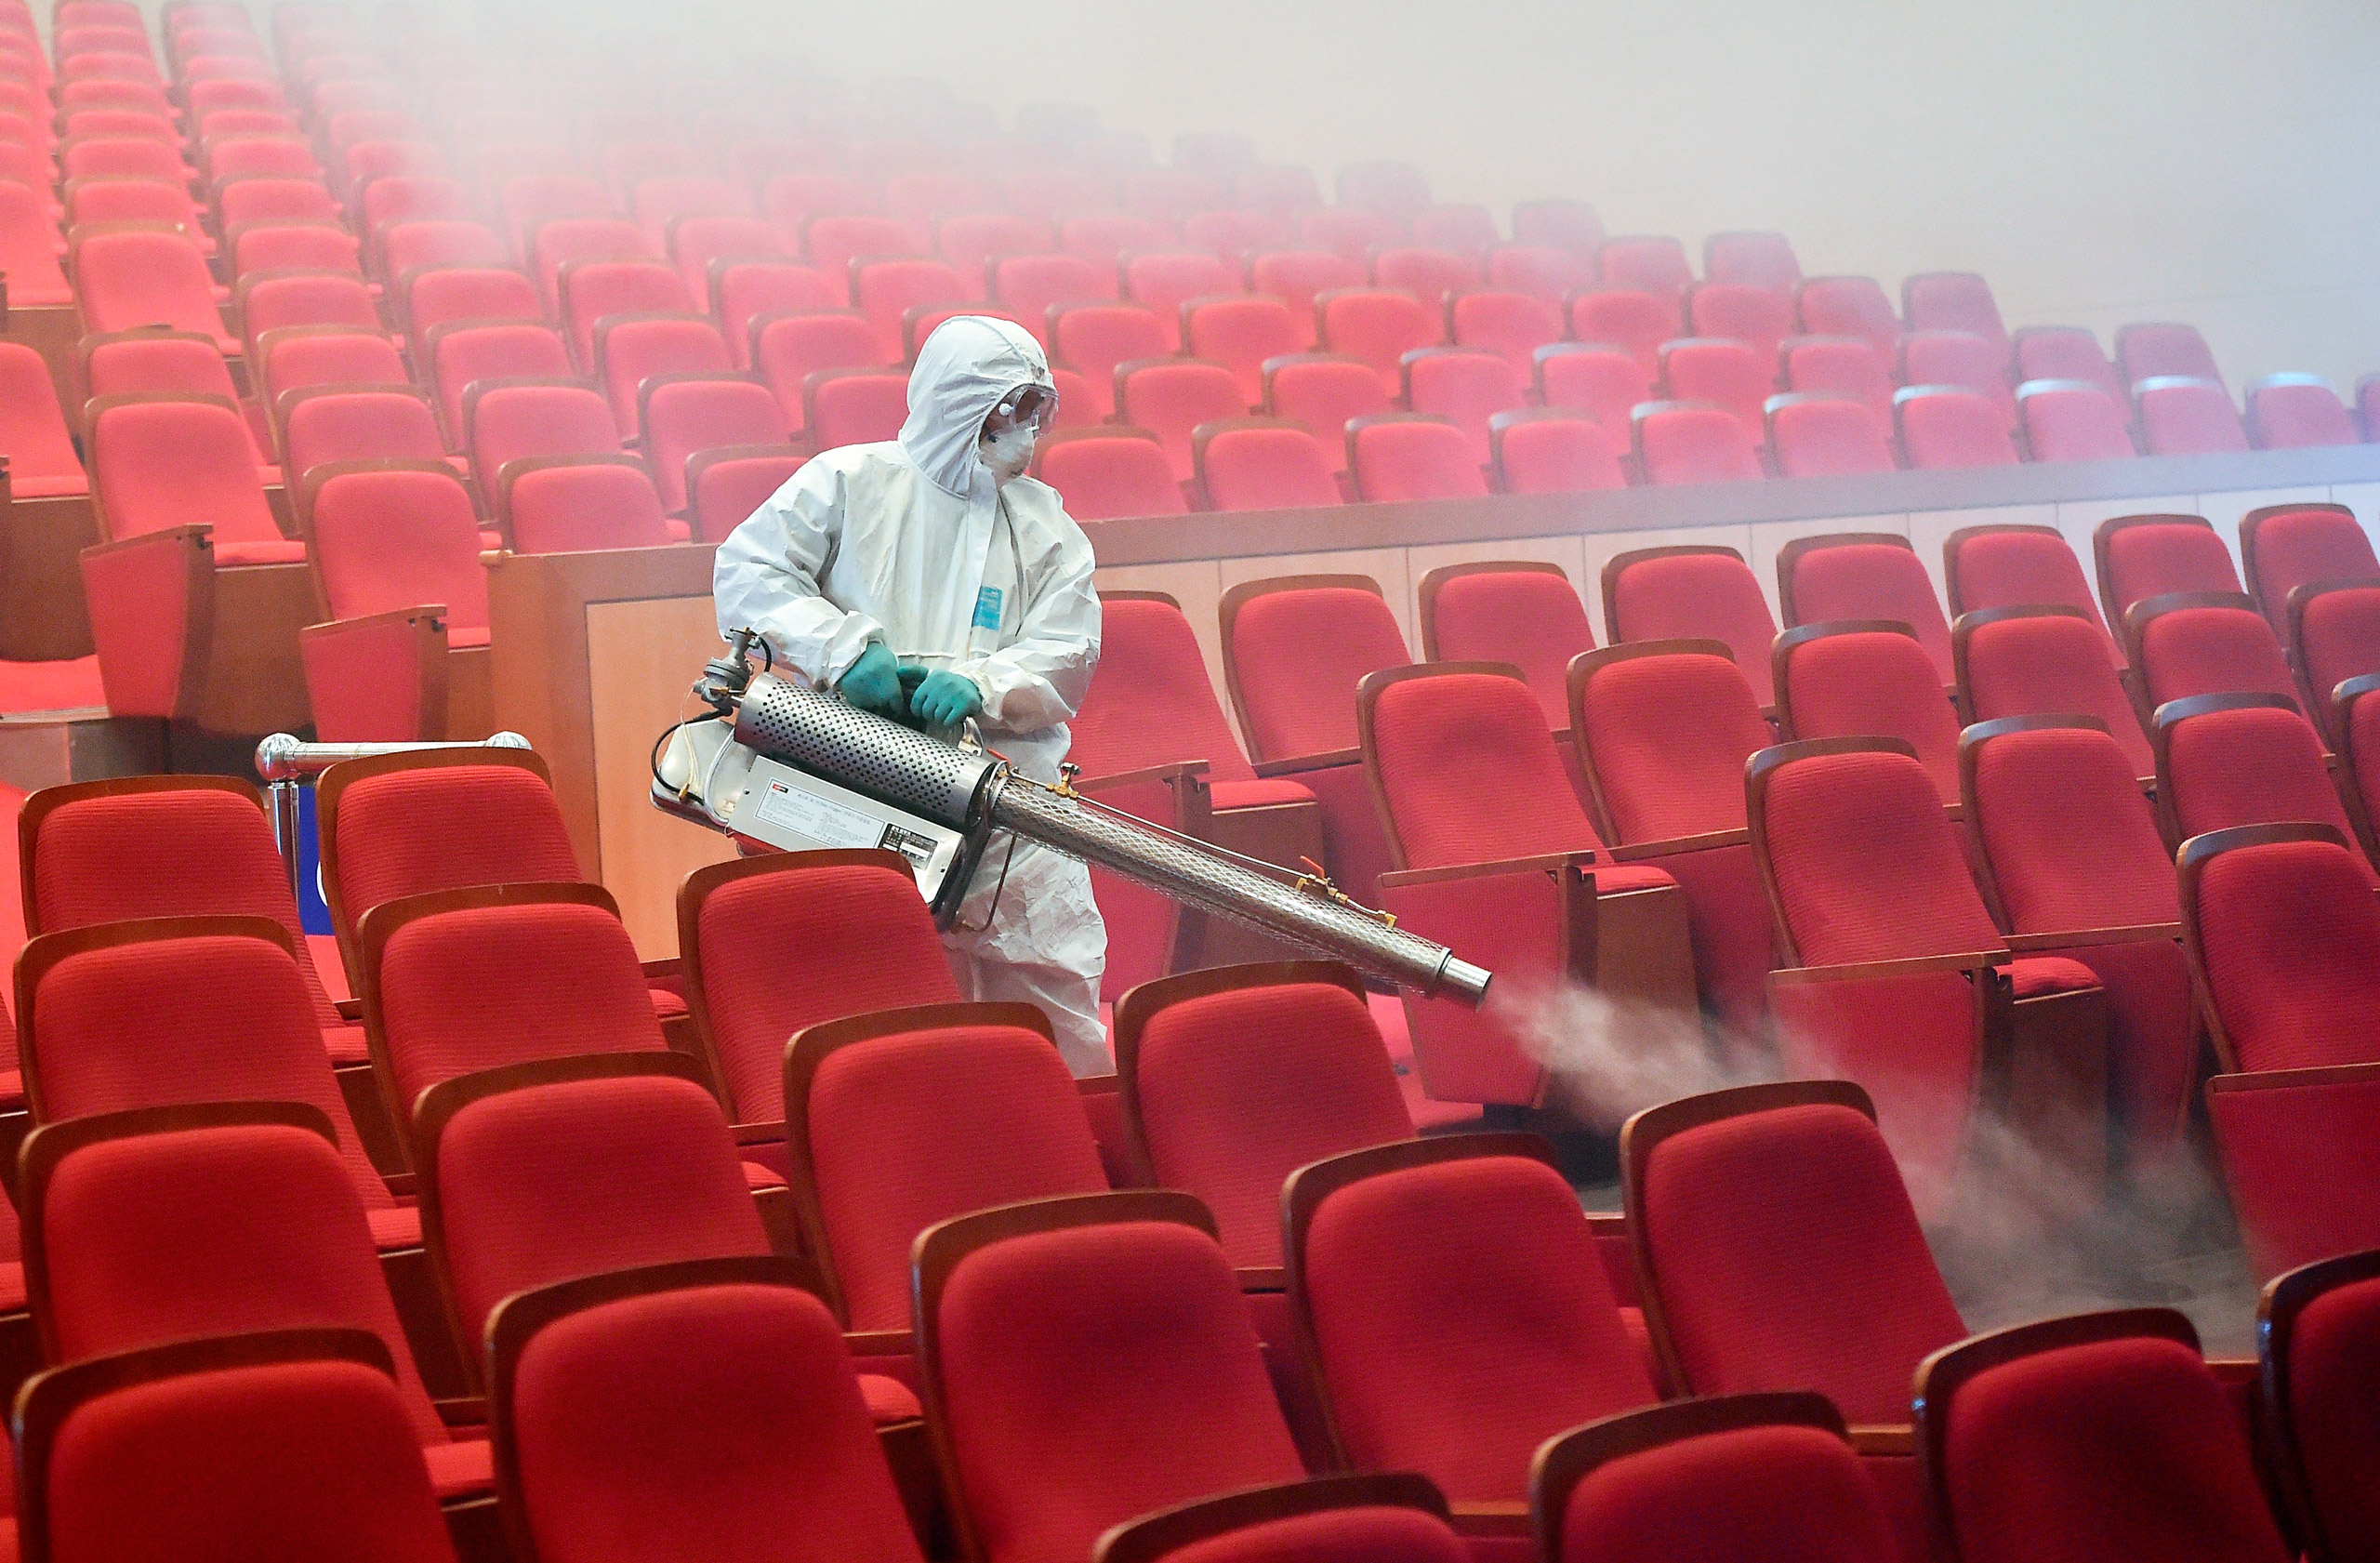 A South Korean health worker fumigates a movie theater in June 2015 after MERS cases were reported (Jung Yeon-Je—AFP/Getty Images)